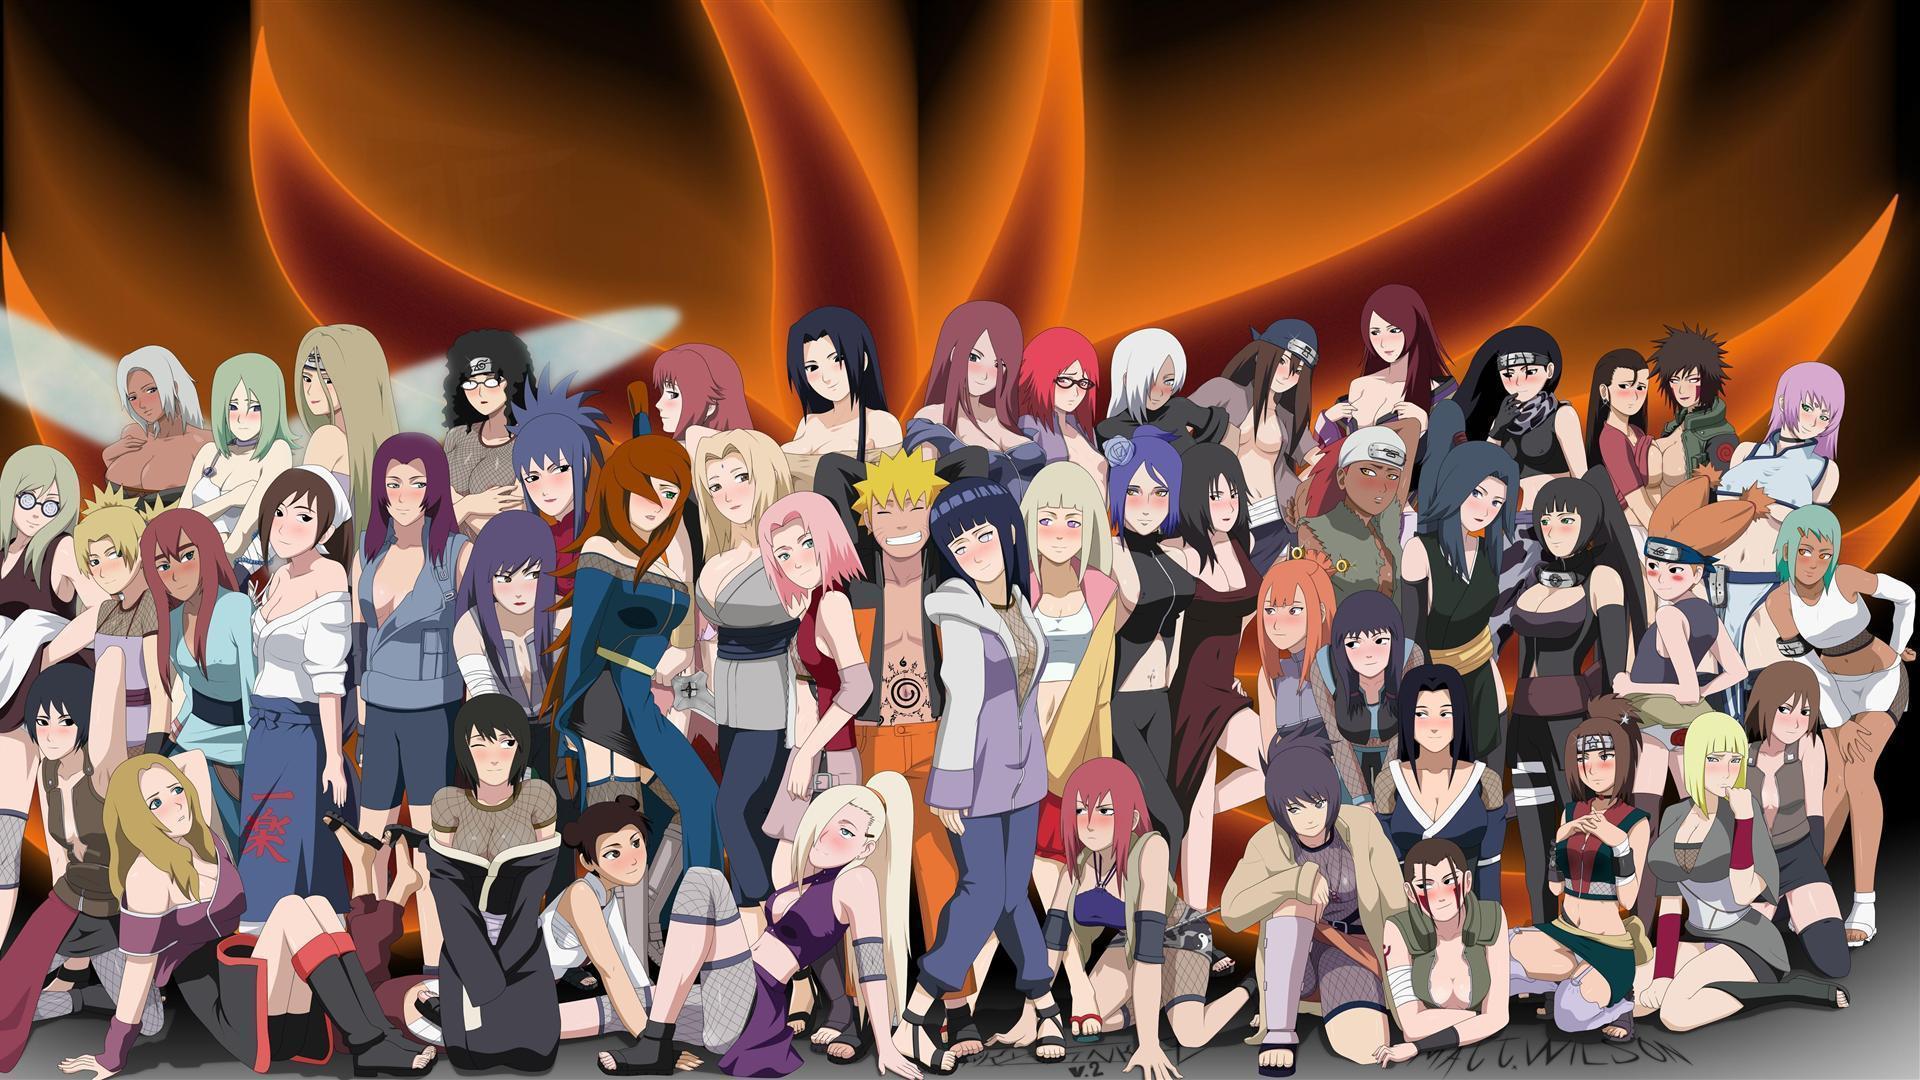 Download Naruto Page Picture And Wallpaper 1920x1080. Full HD